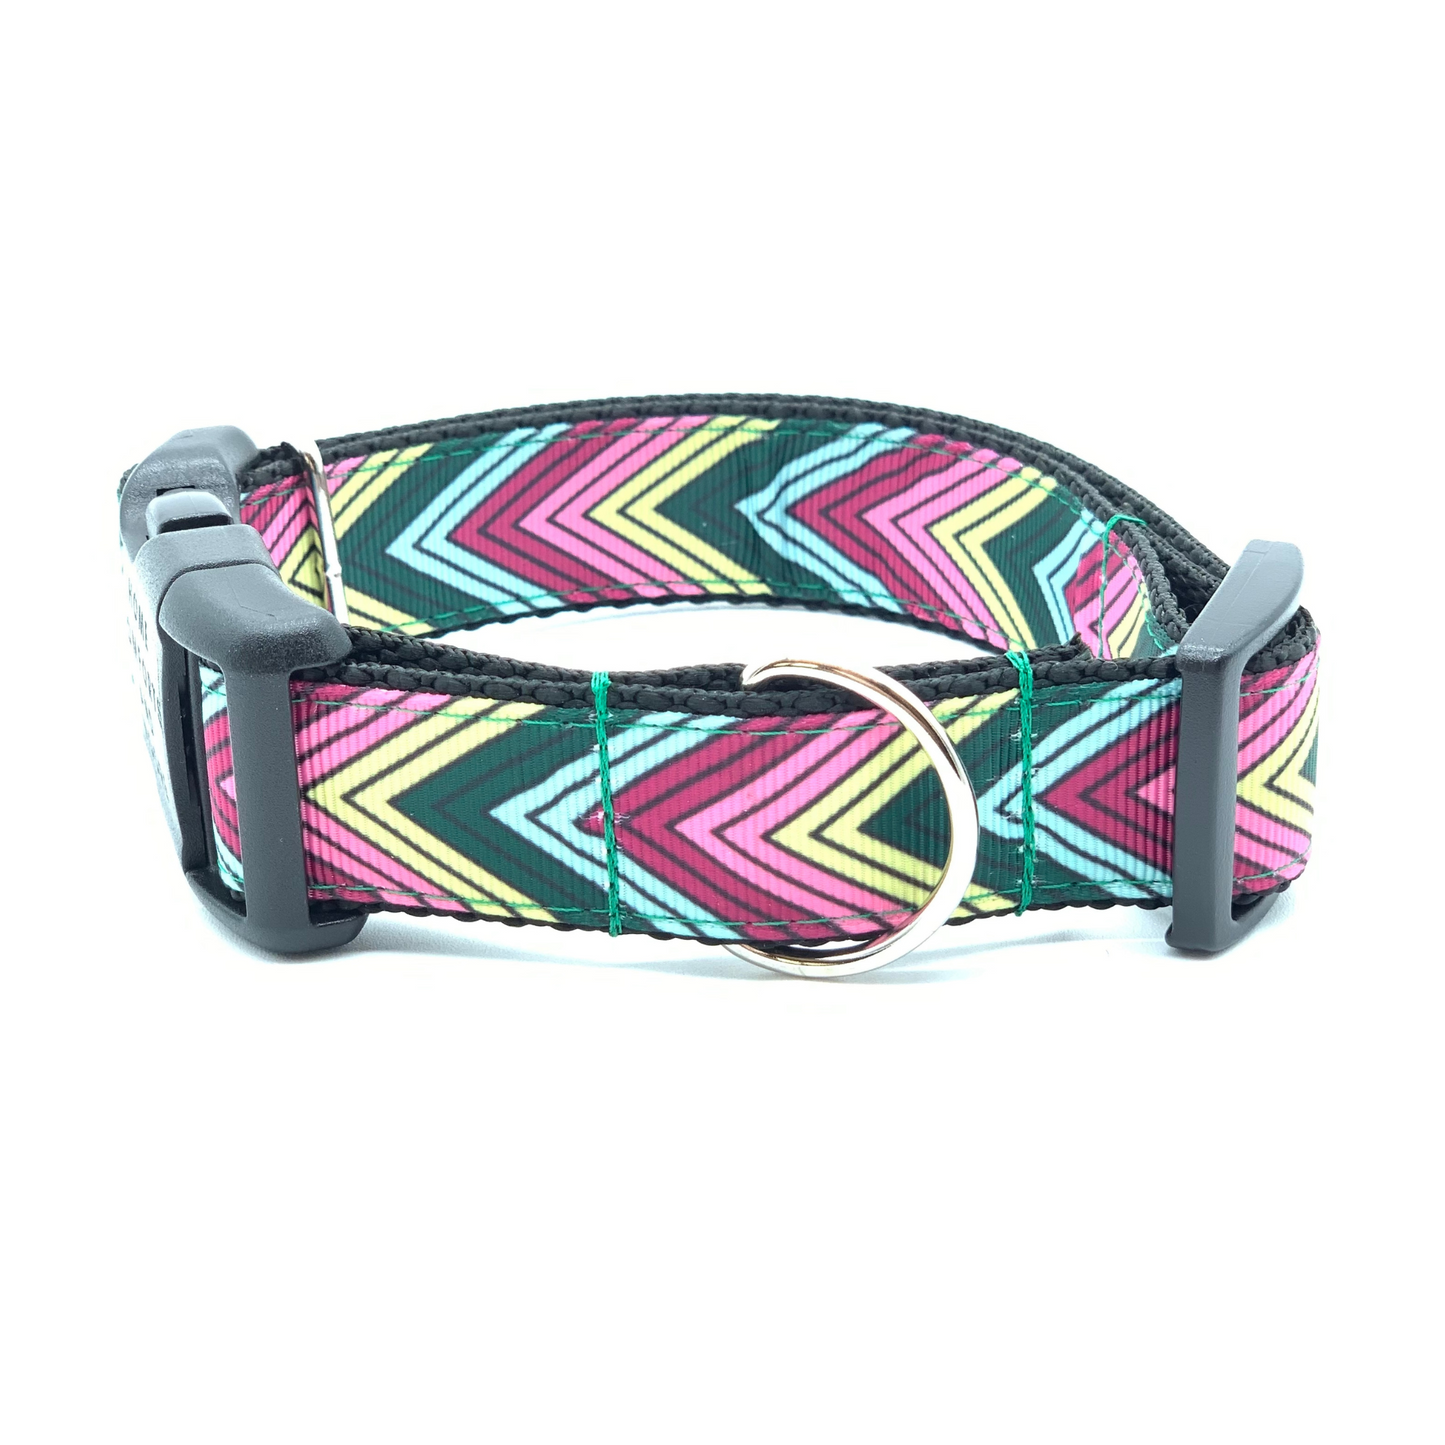 Multicolored Pink and Teal Chevron Dog Collar